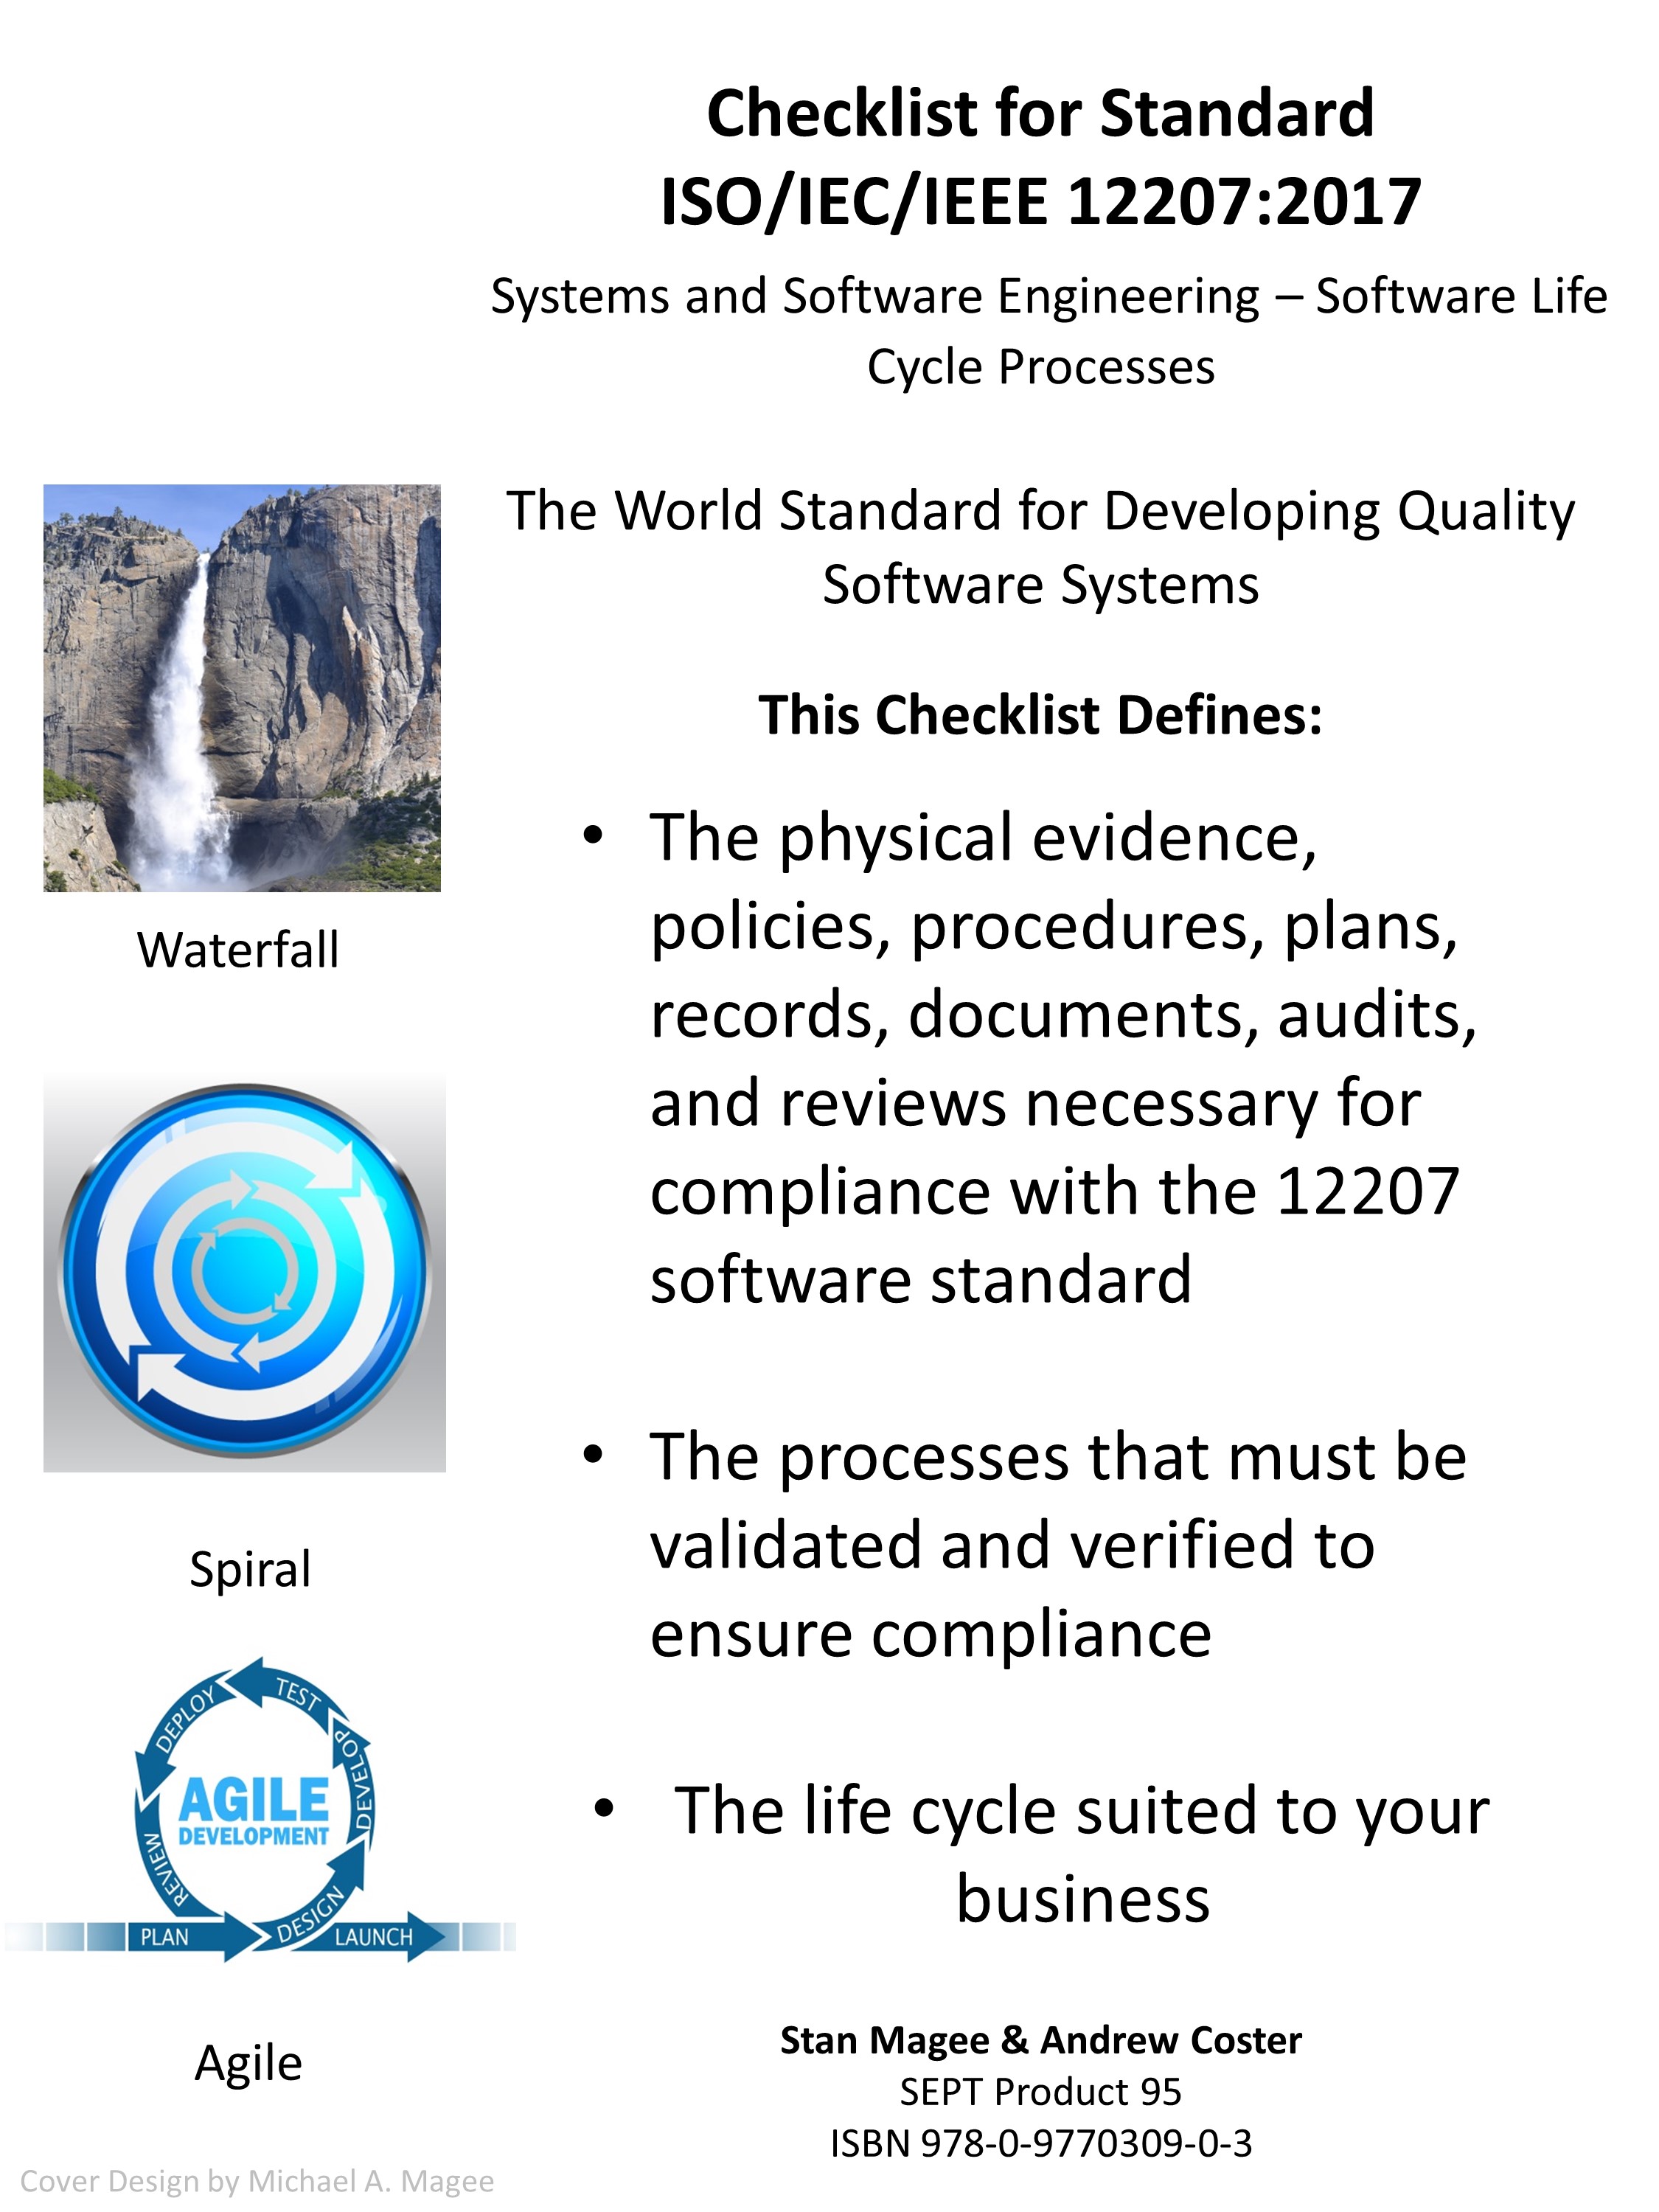 Evidence Product Checklist for ISO/IEC 12207:2017 ''System and Software Engineering - Software Life Cycle Processes''